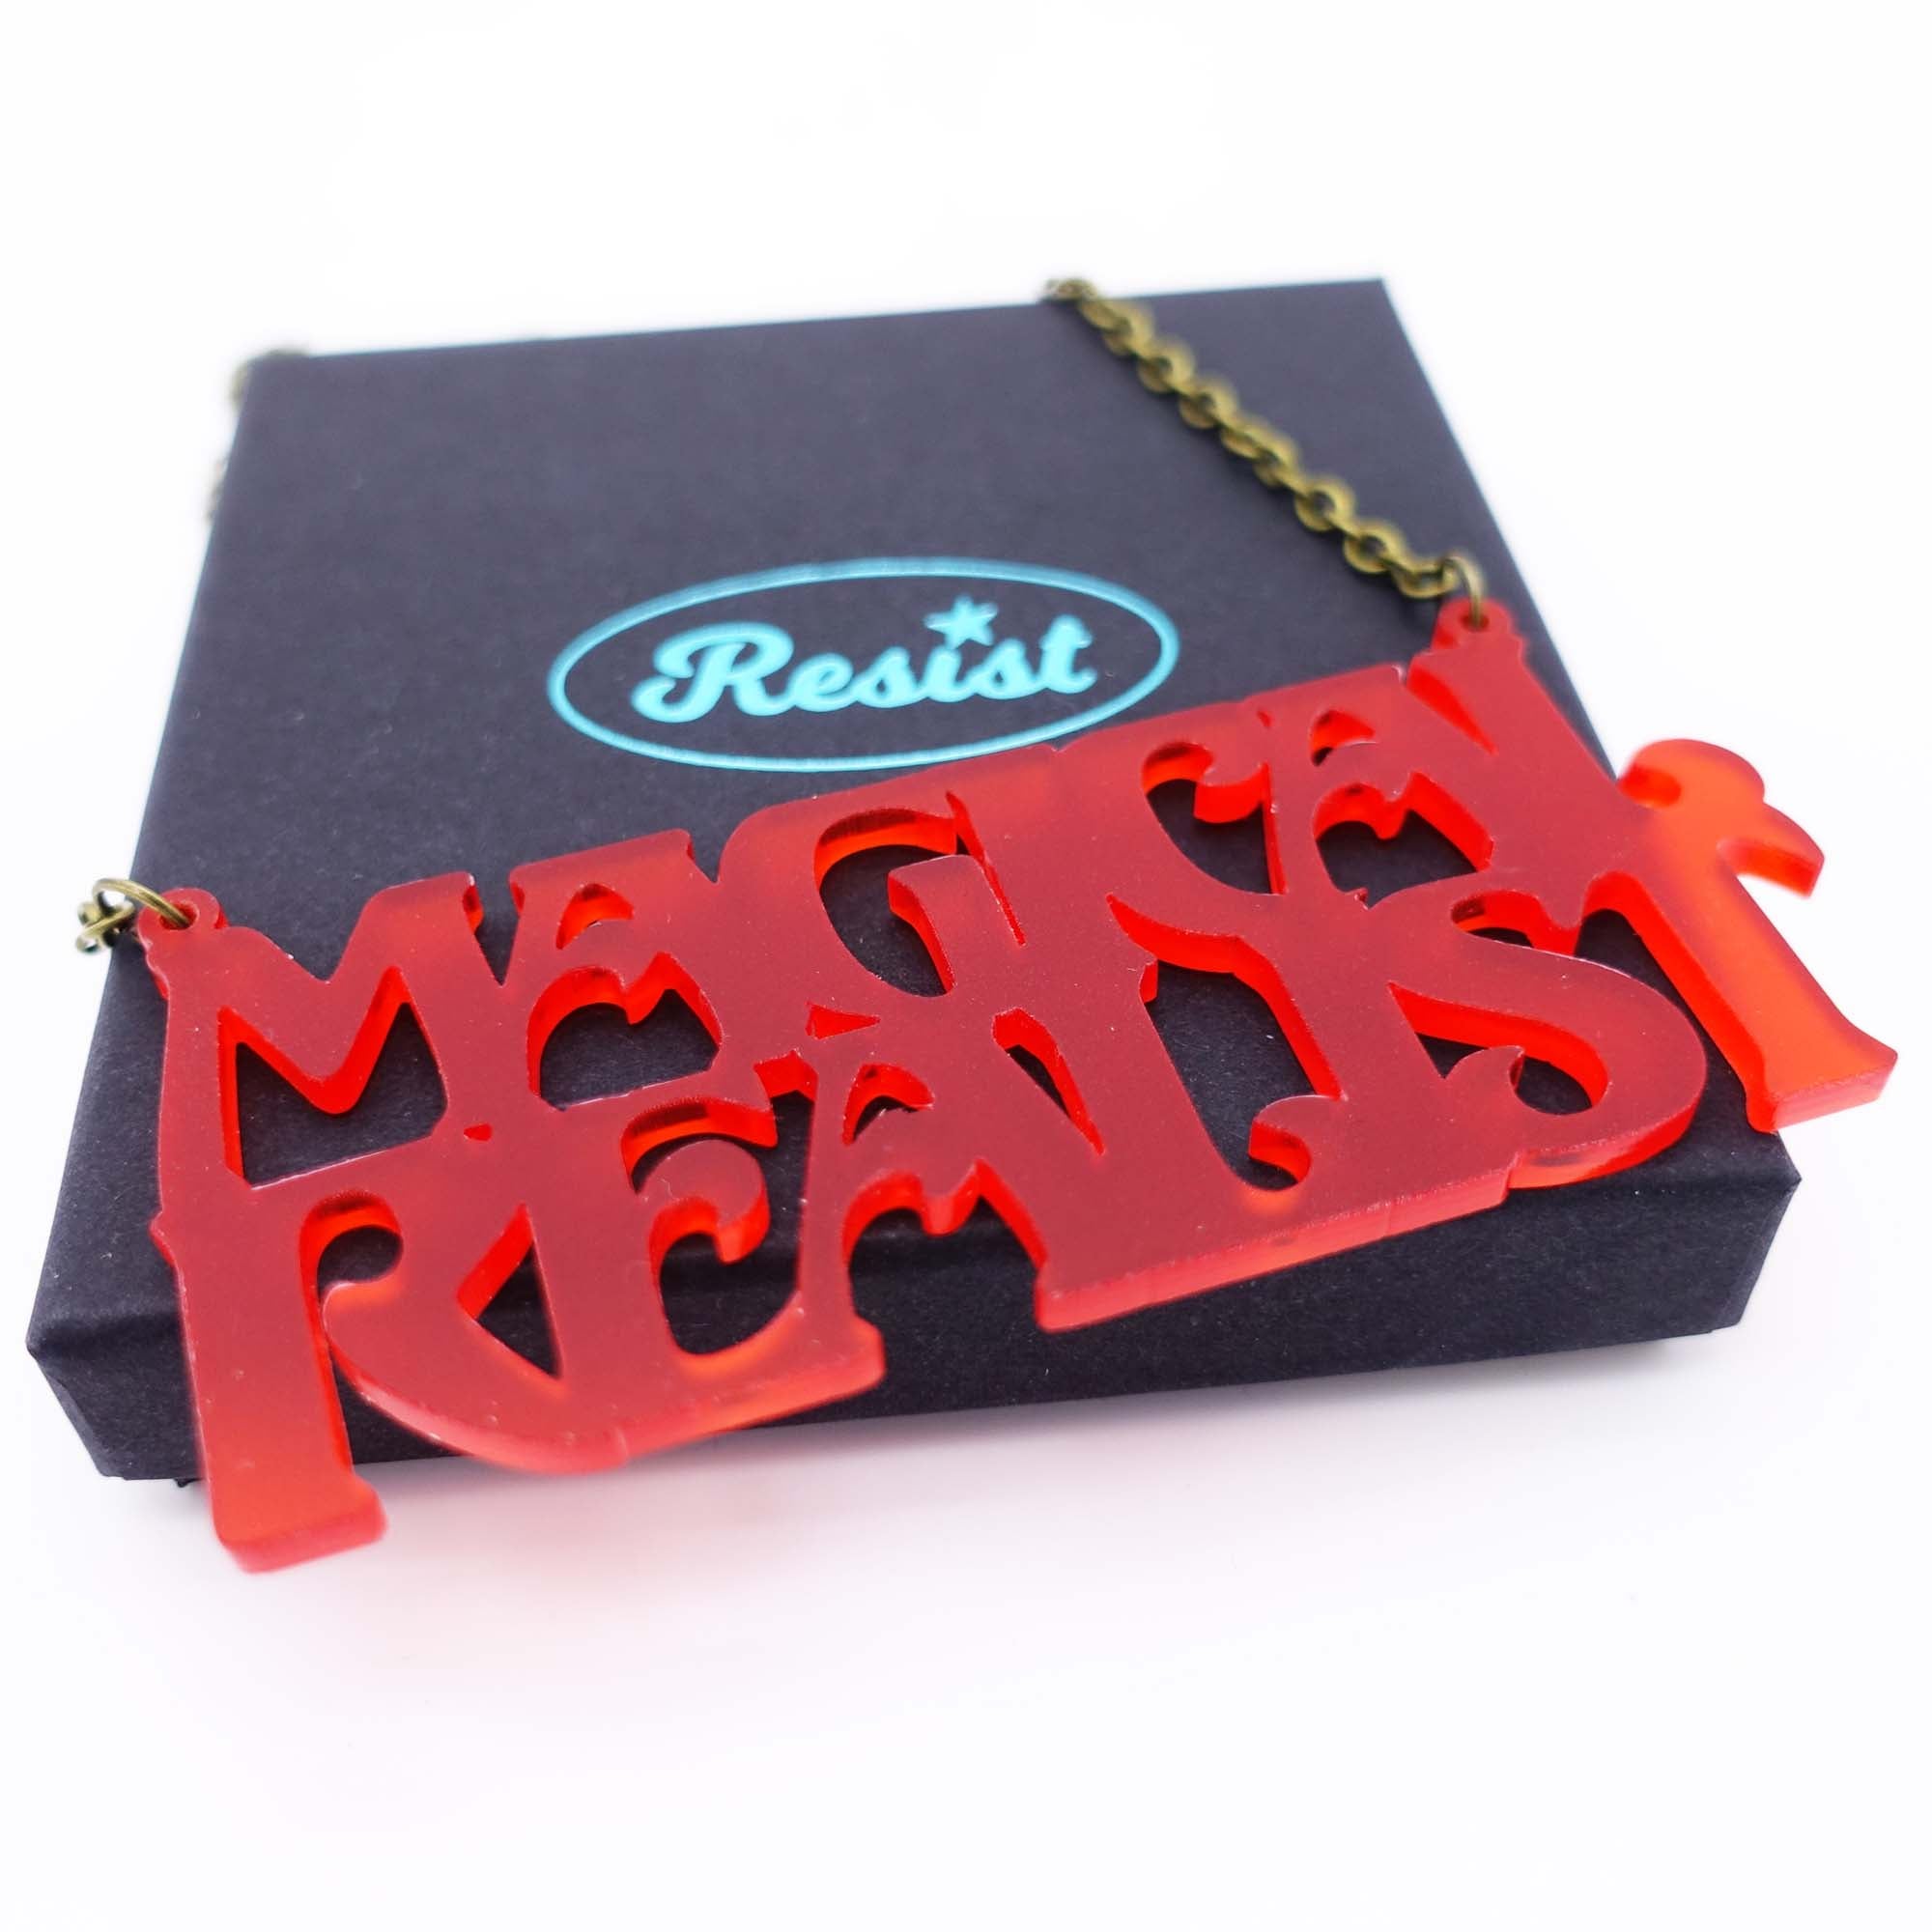 chilli frost magical realist necklace for writers and book lovers shown on box